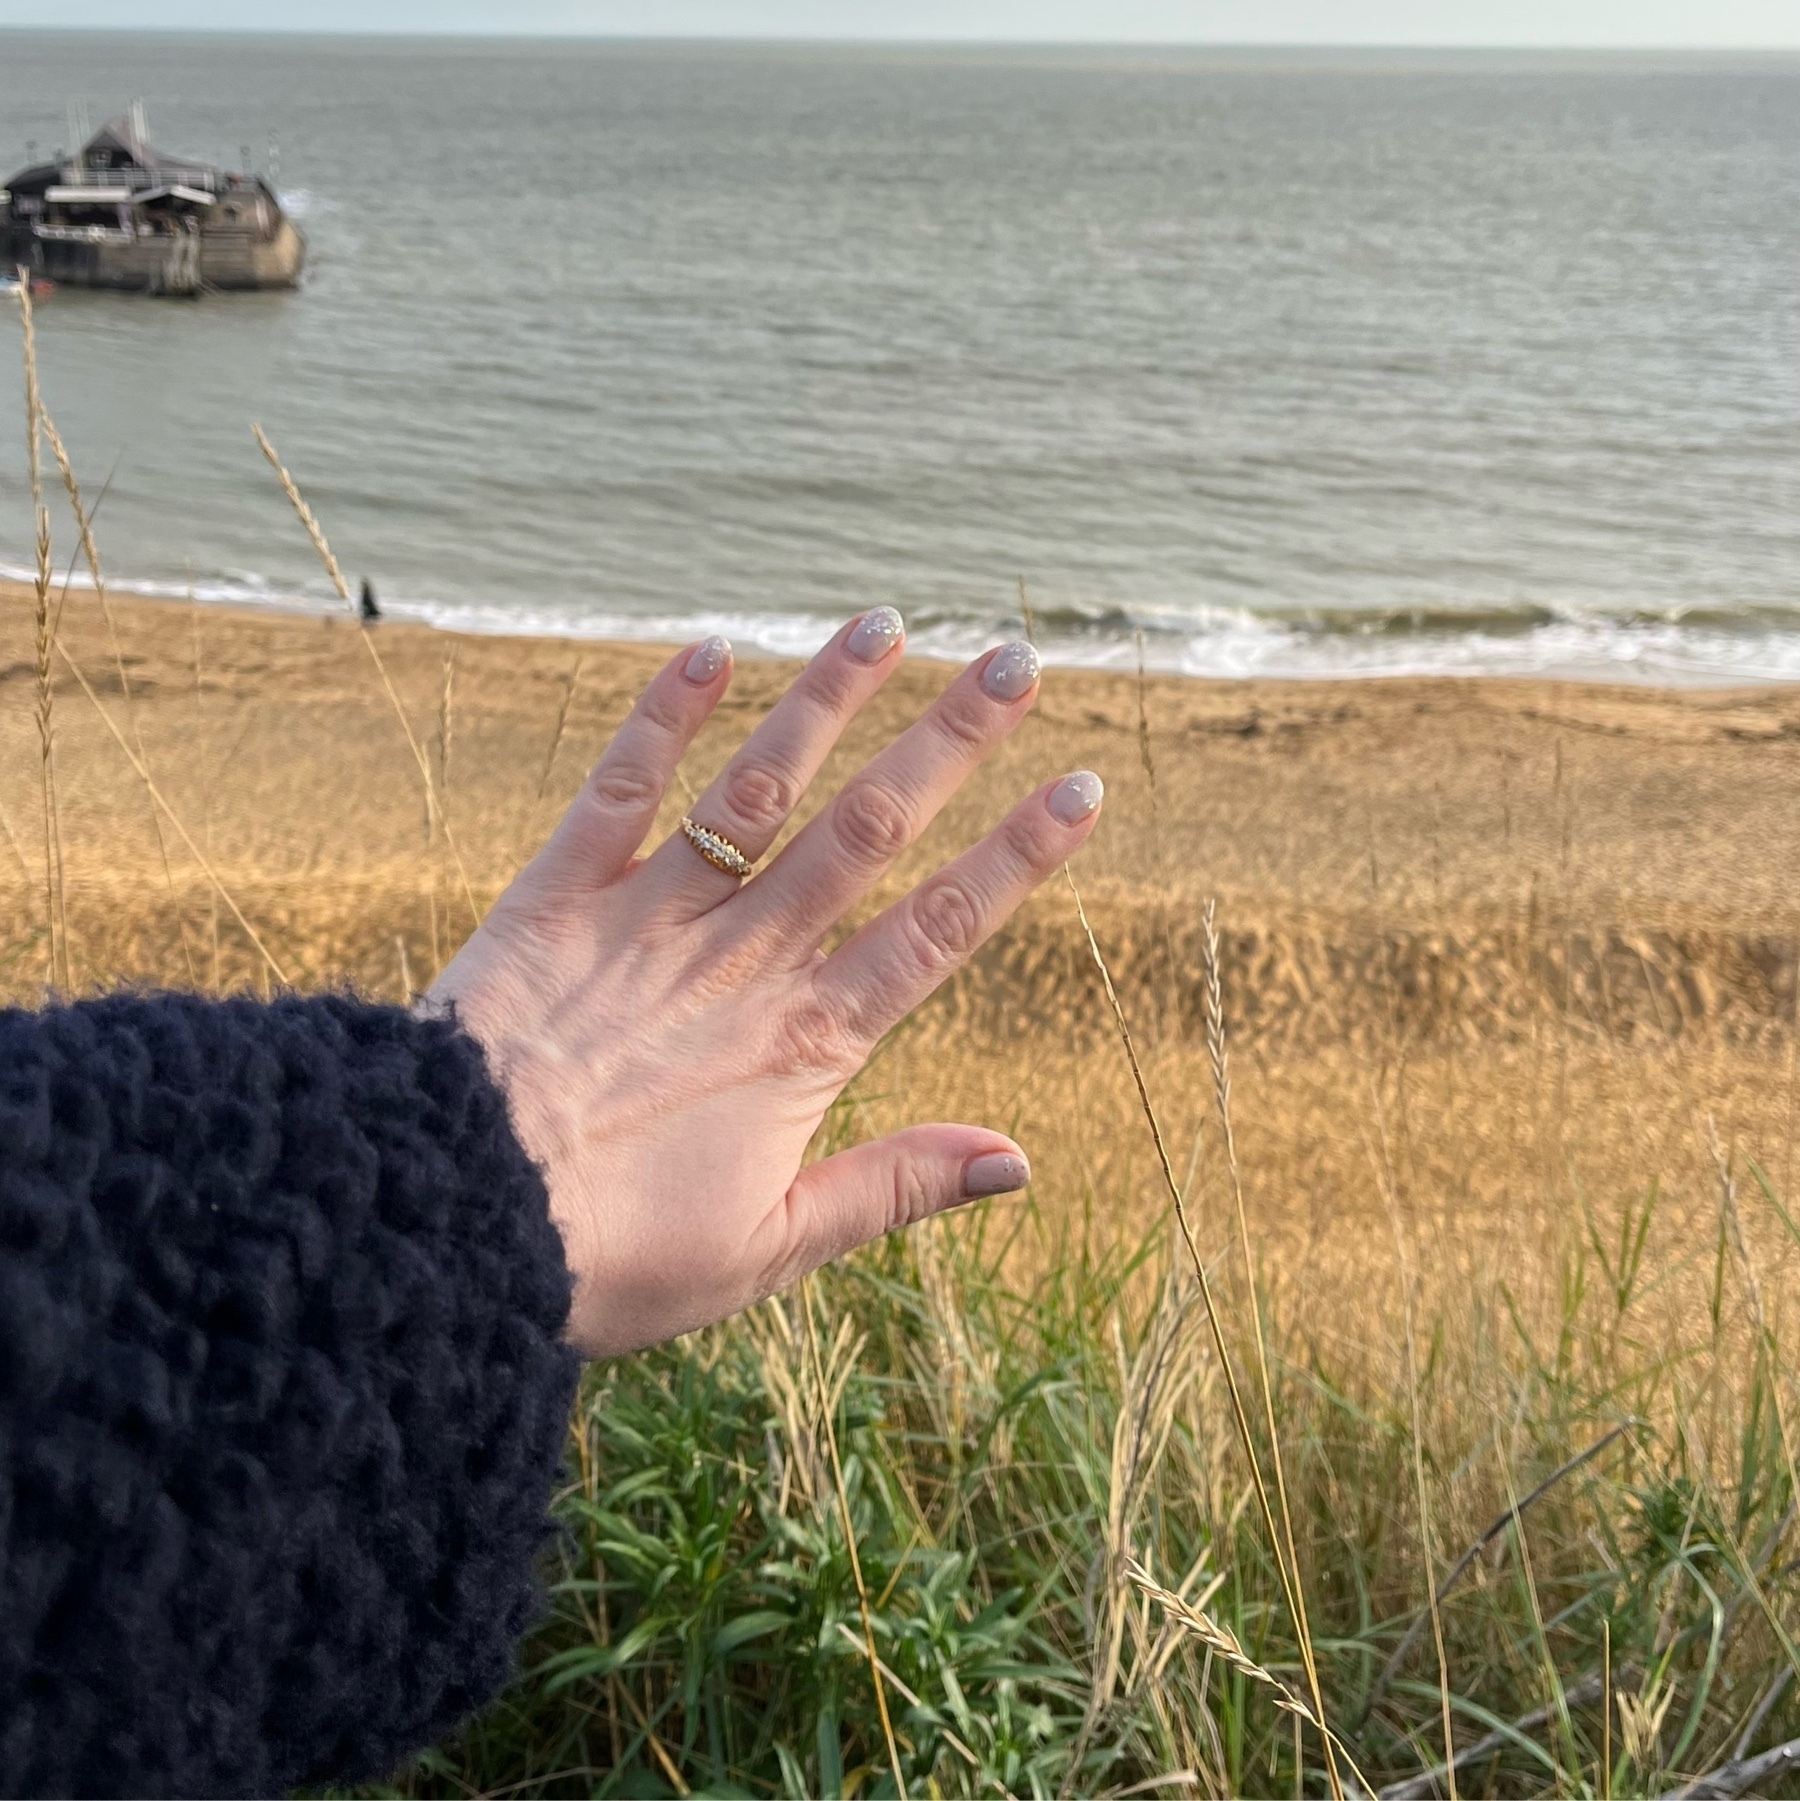 Hand wearing engagment ring against a sandy beach background